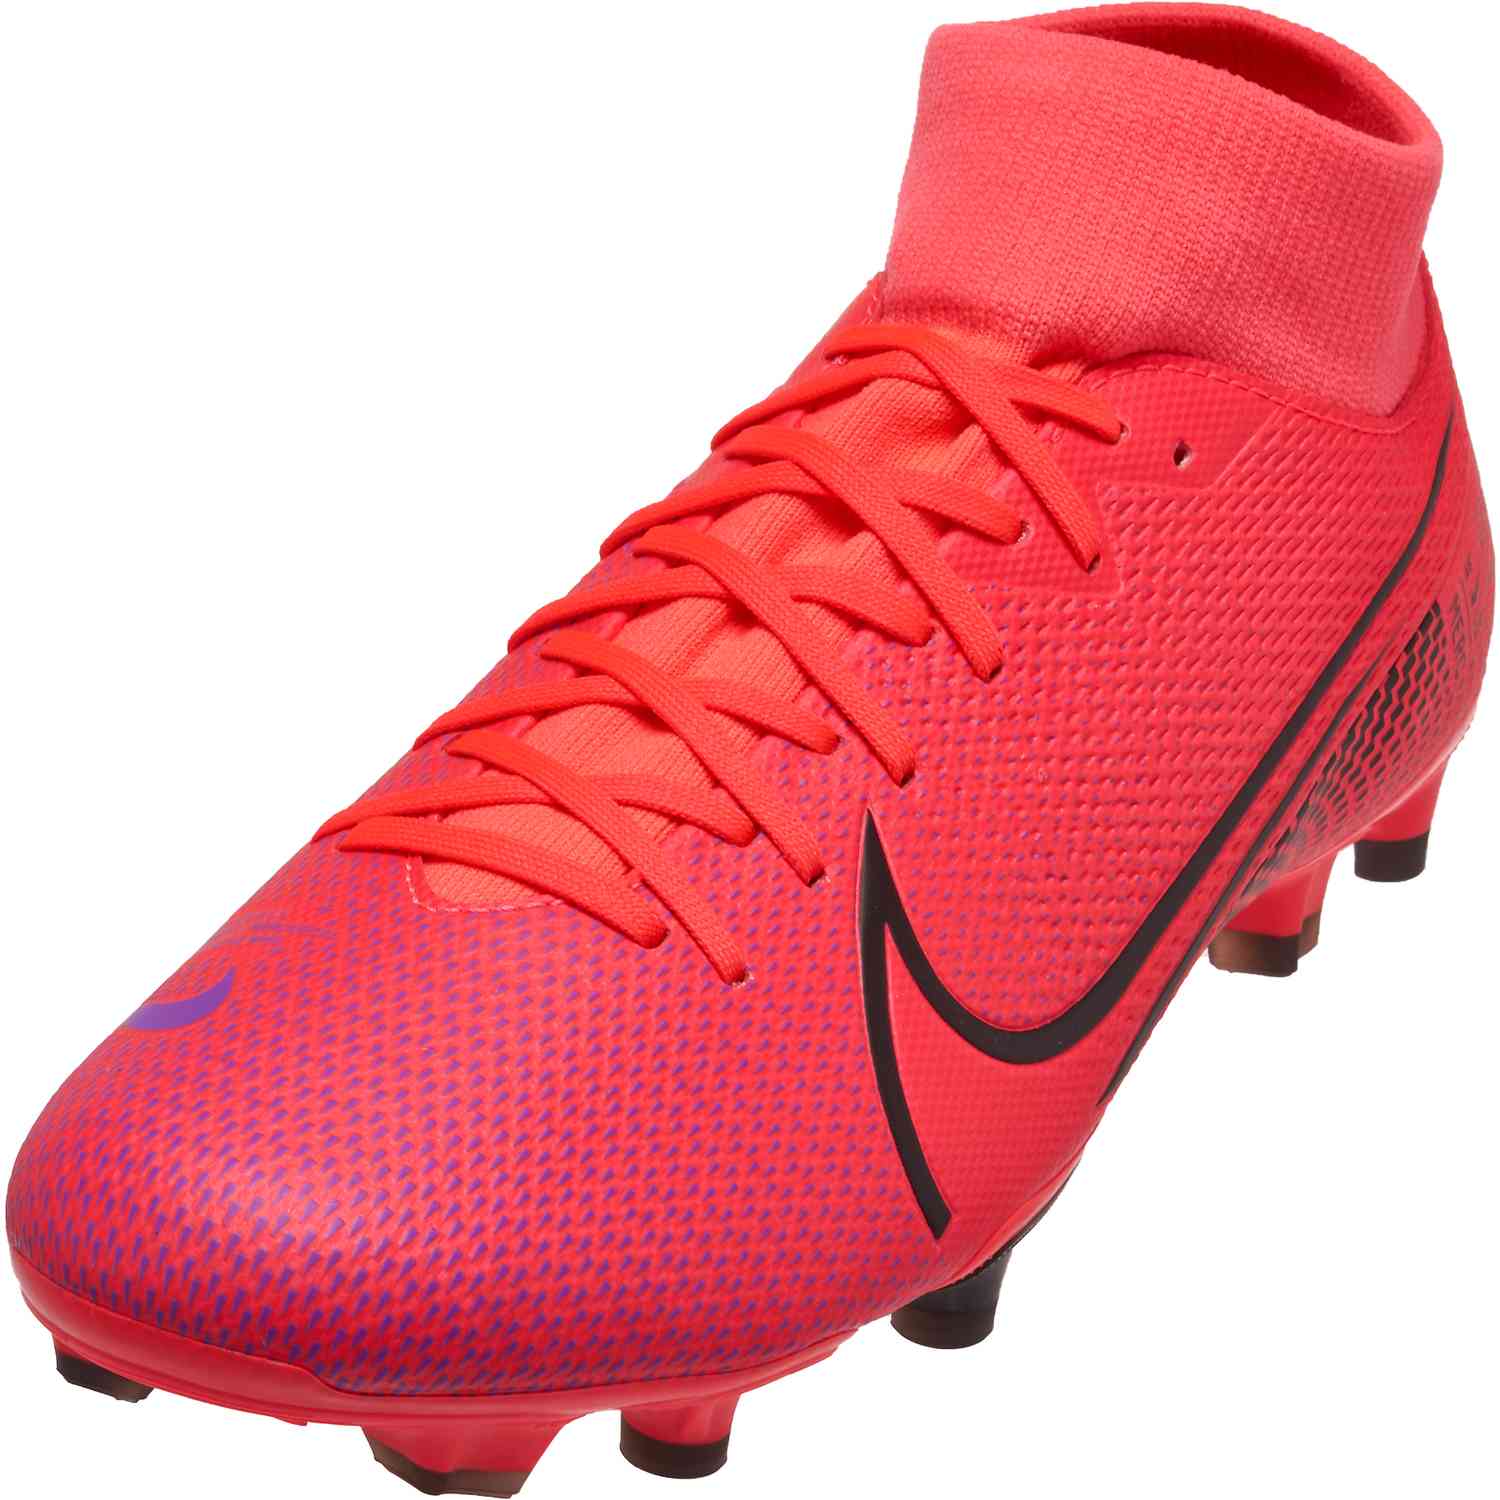 Nike Mercurial Superfly Academy FG - Future Lab - Soccer Master